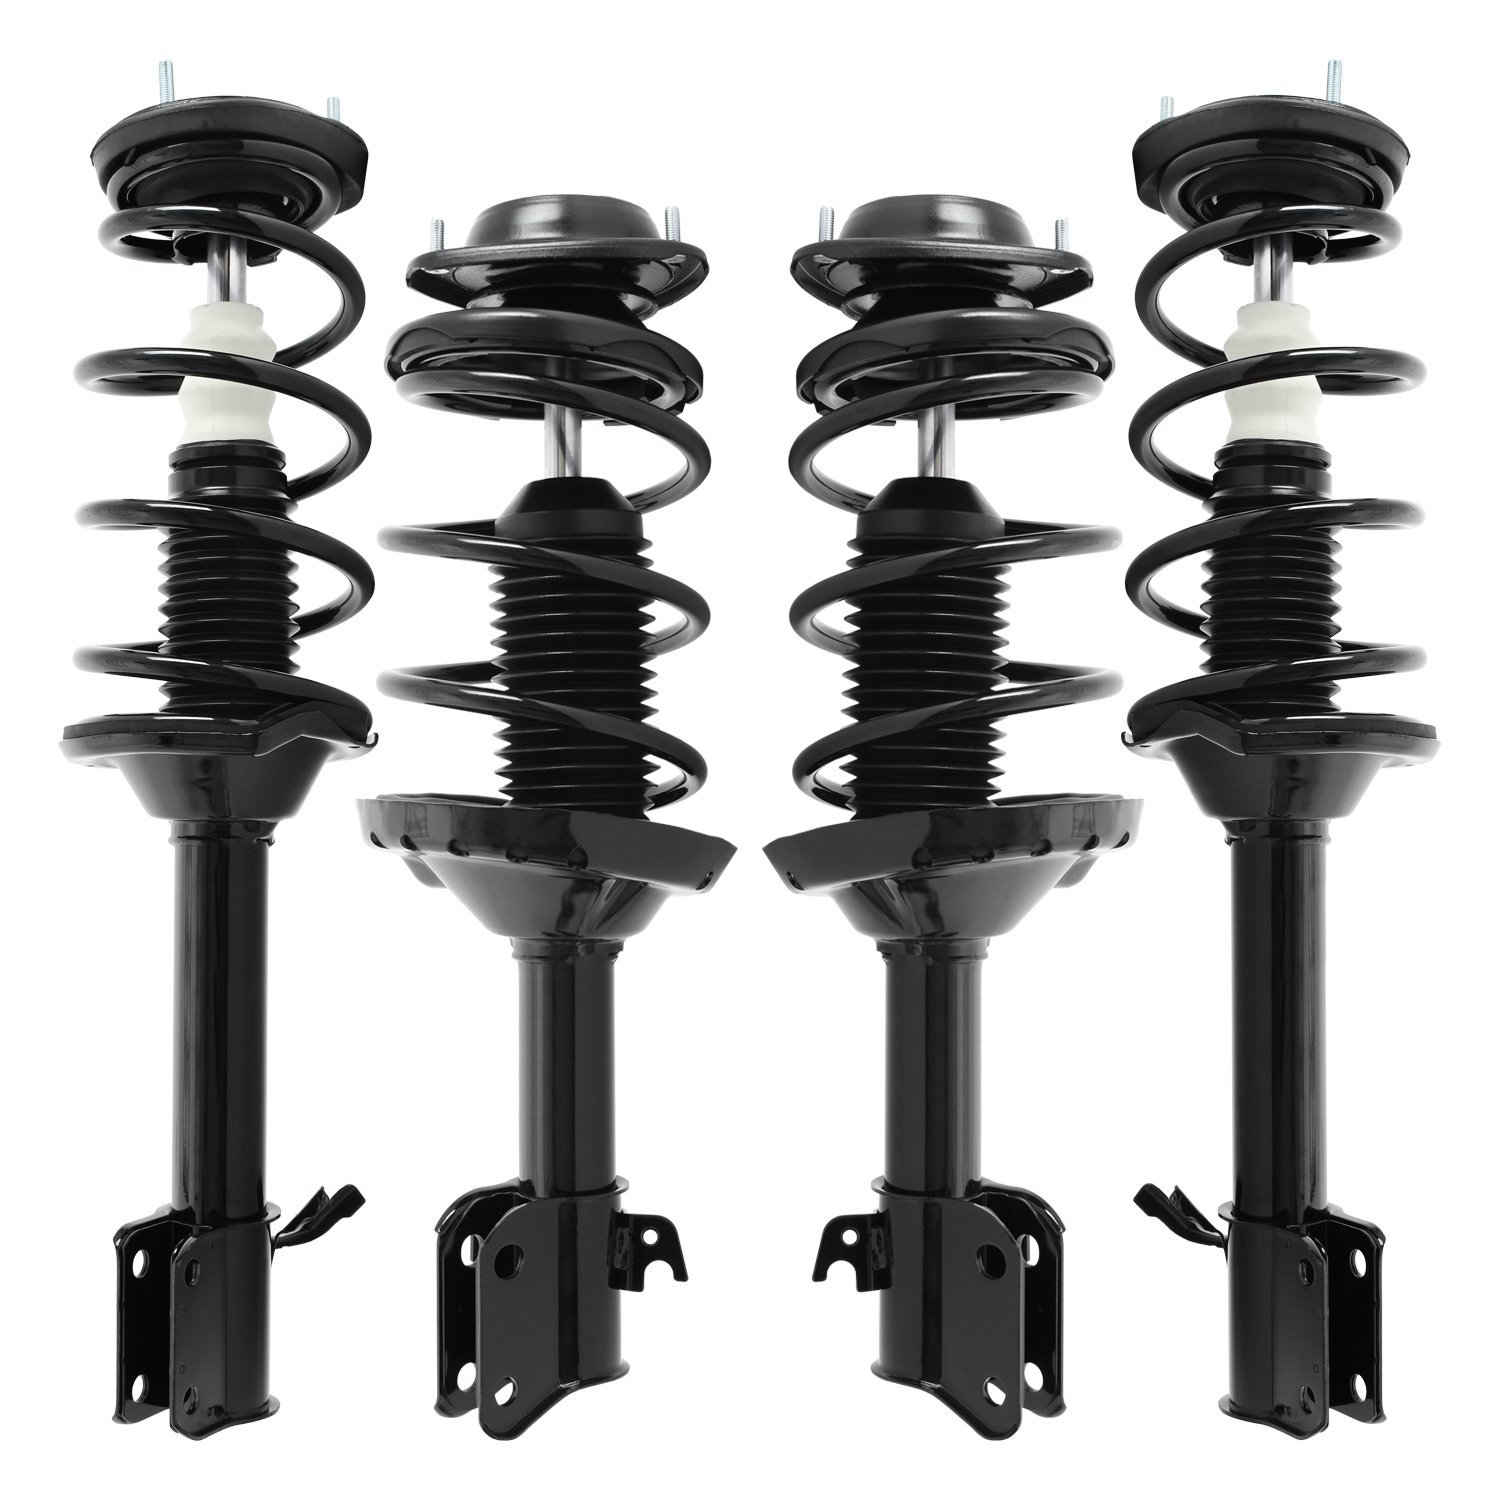 4-11821-15811-001 Front & Rear Suspension Strut & Coil Spring Assembly Kit Fits Select Subaru Forester